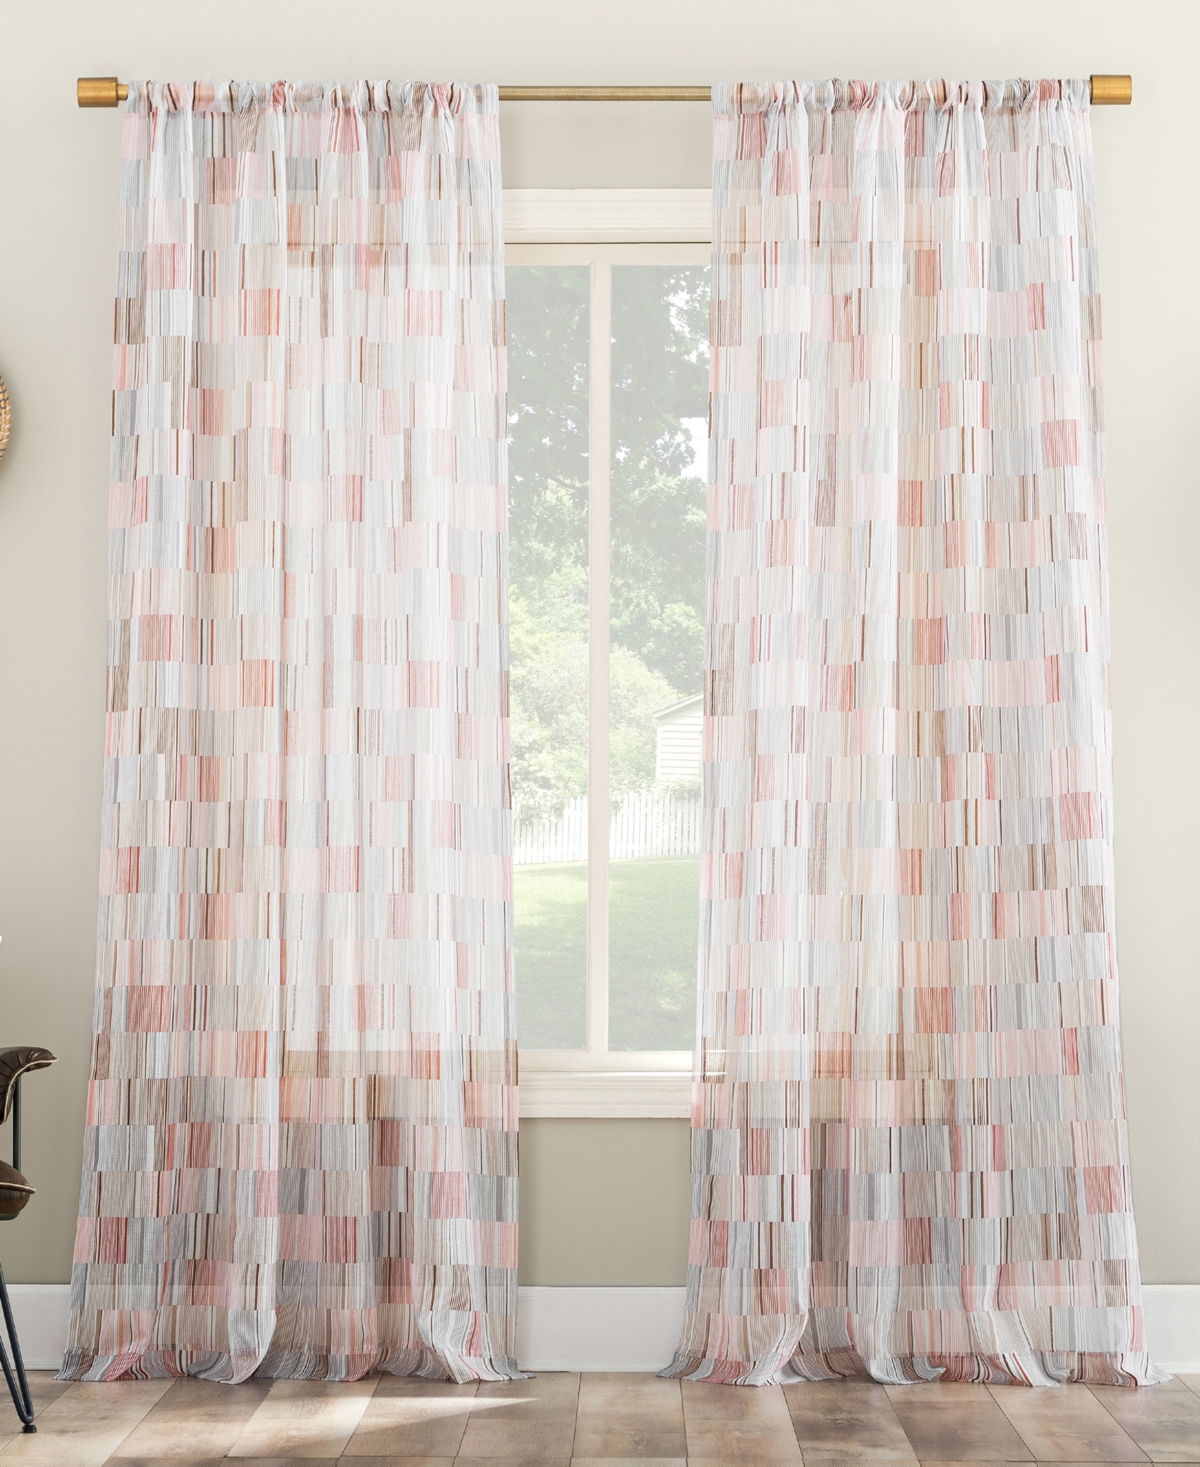 No. 918 Colby Offset, Stripes Sheer Rod Pocket Single Curtain Panel, 56" X 63" In Multicolored